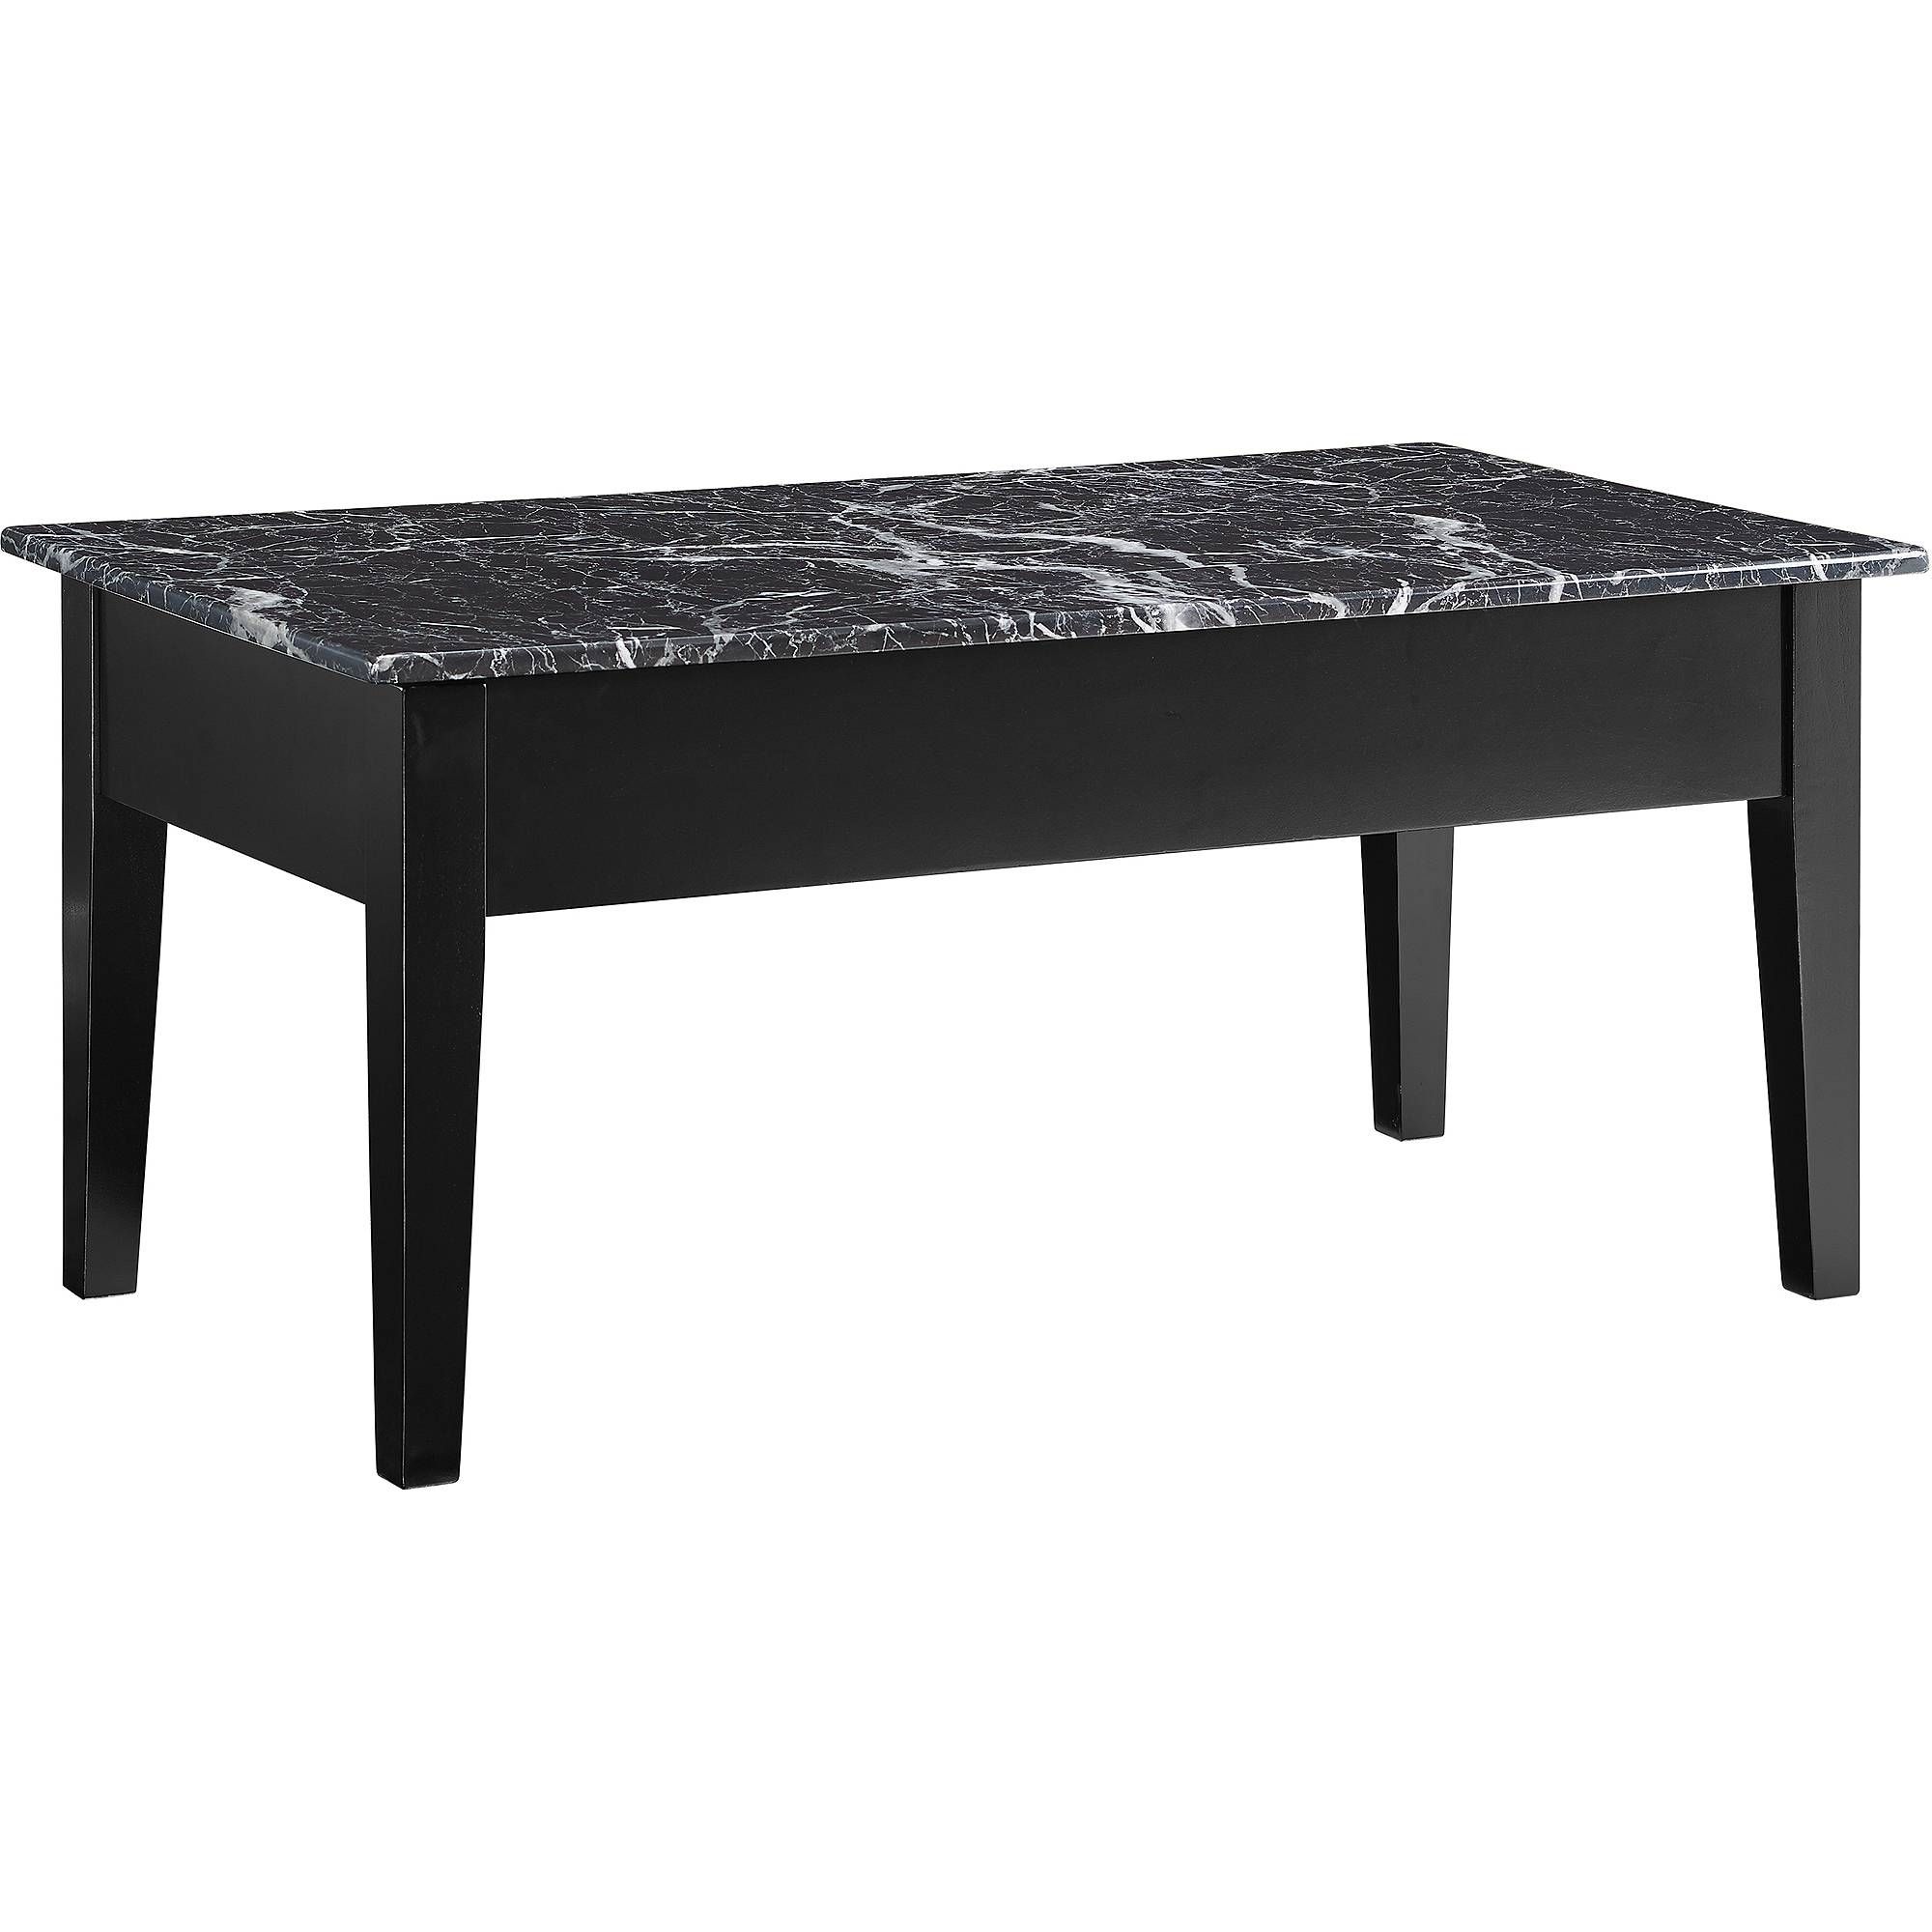 Black Marble Coffee Table | Coffee Tables Decoration With Black And Grey Marble Coffee Tables (View 24 of 30)